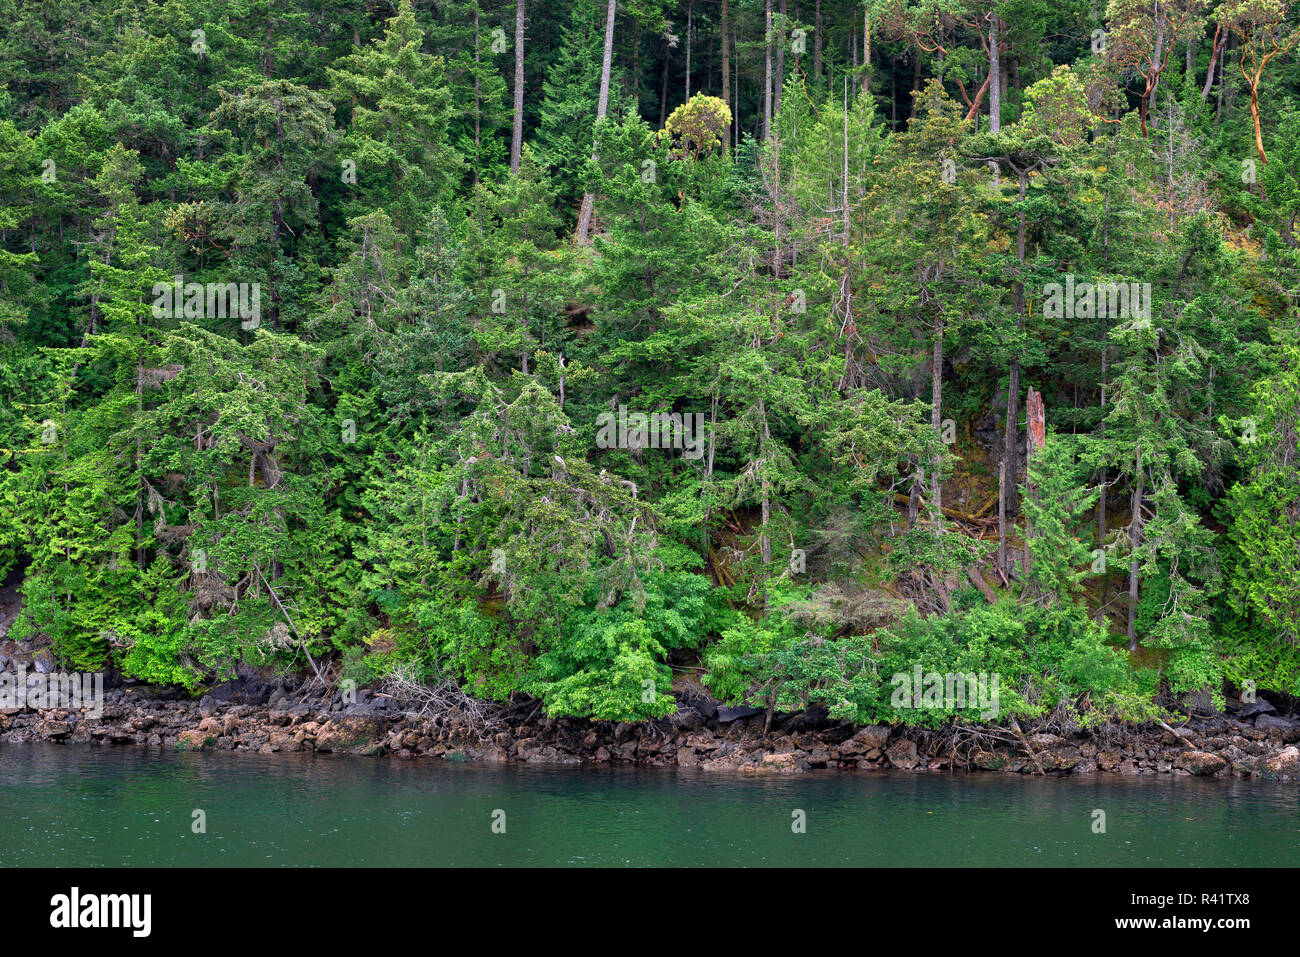 USA, Washington State, San Juan Islands, Shaw Island, Forest of Douglas fir with scattered Pacific madrone trees above rocky shoreline. Stock Photo